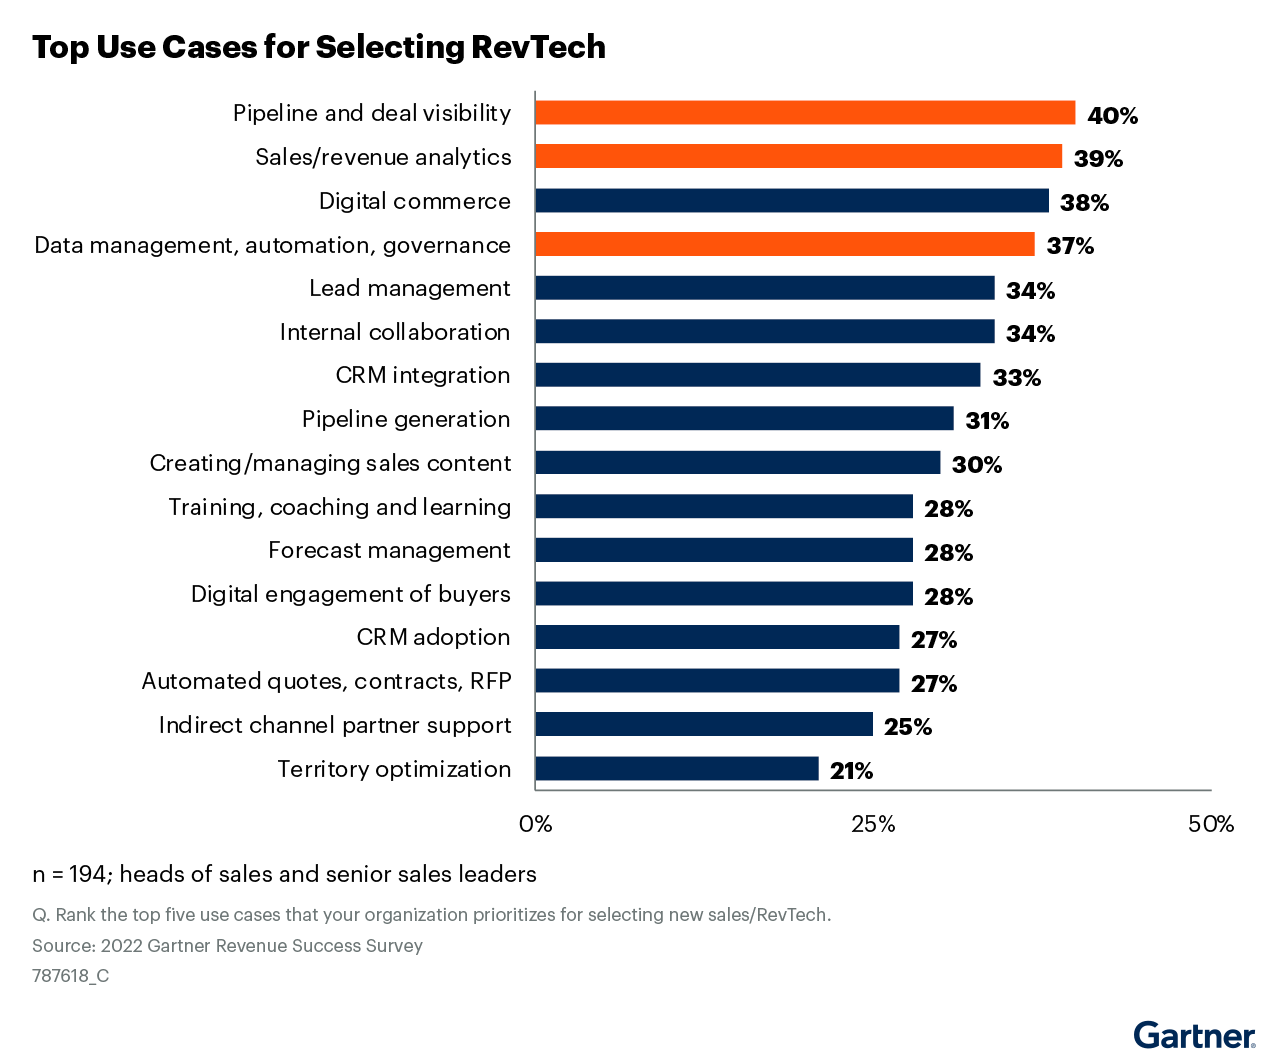 As-per-the-2022-Gartner-Revenue-Success-Survey,-the-top-use-cases-for-selecting-RevTech-are_-pipeline-and-deal-visibility,-sales_revenue-analytics,-and-data-management,-automation-and-governance--target-2